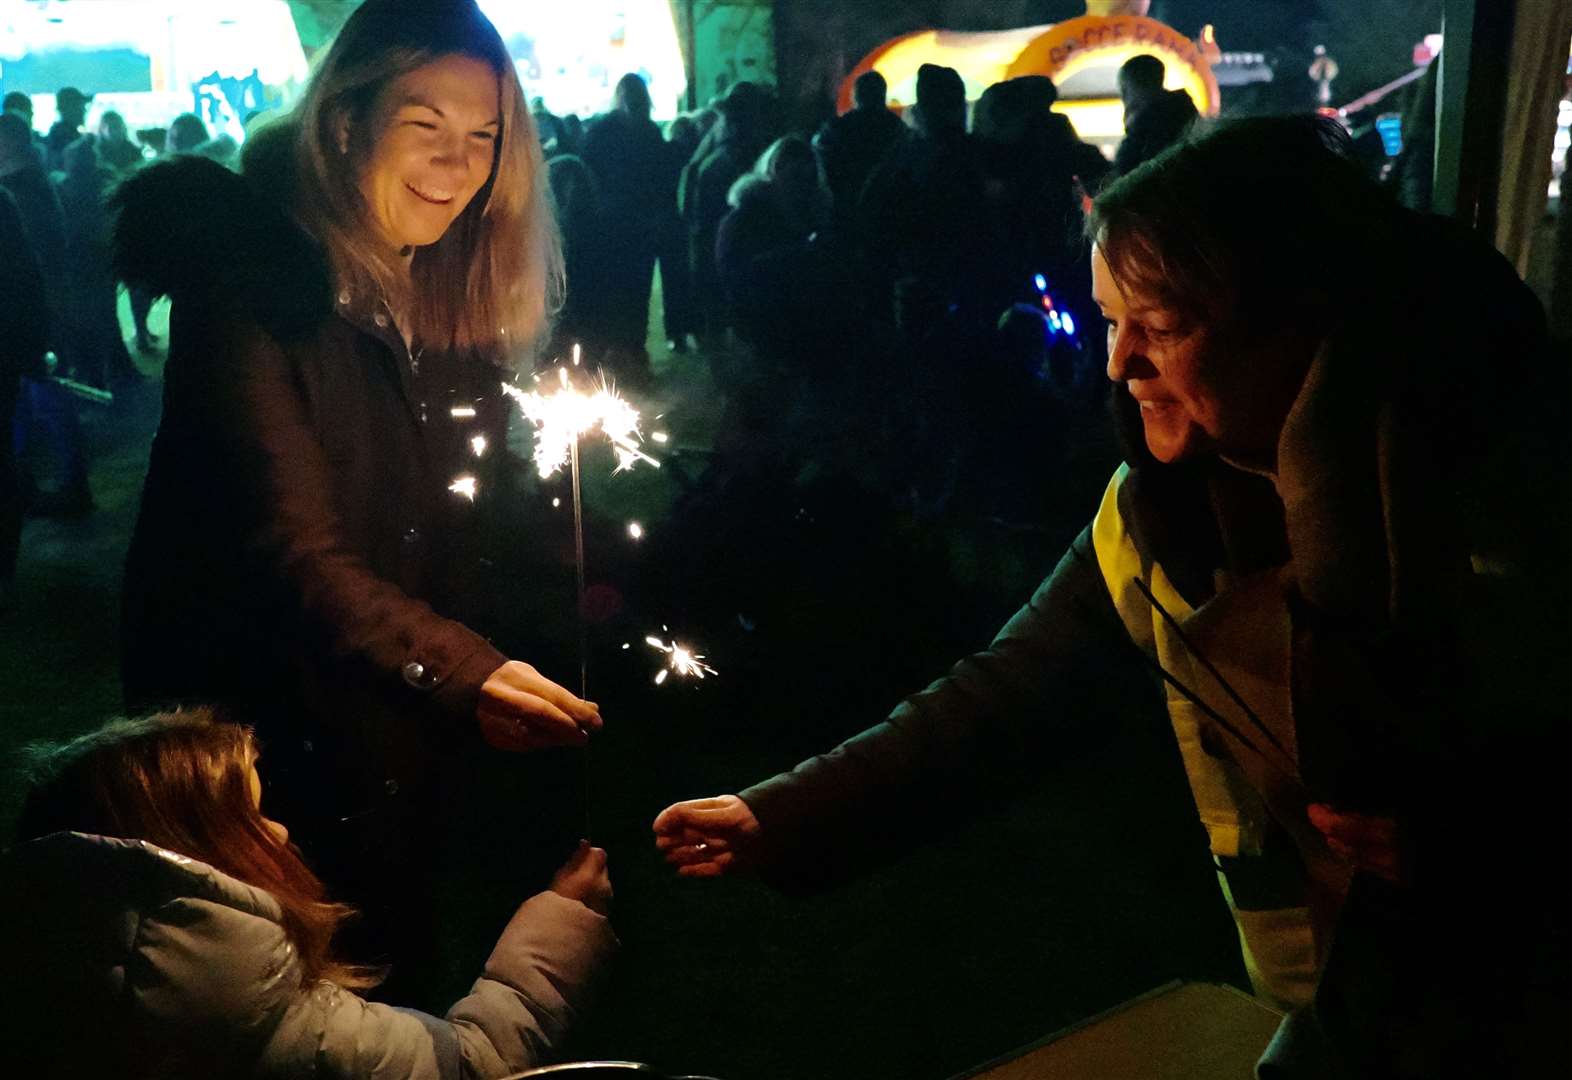 Sparklers were among the 'quiet' fireworks on show at Dornoch bonfire night. Photo: Peter Wild